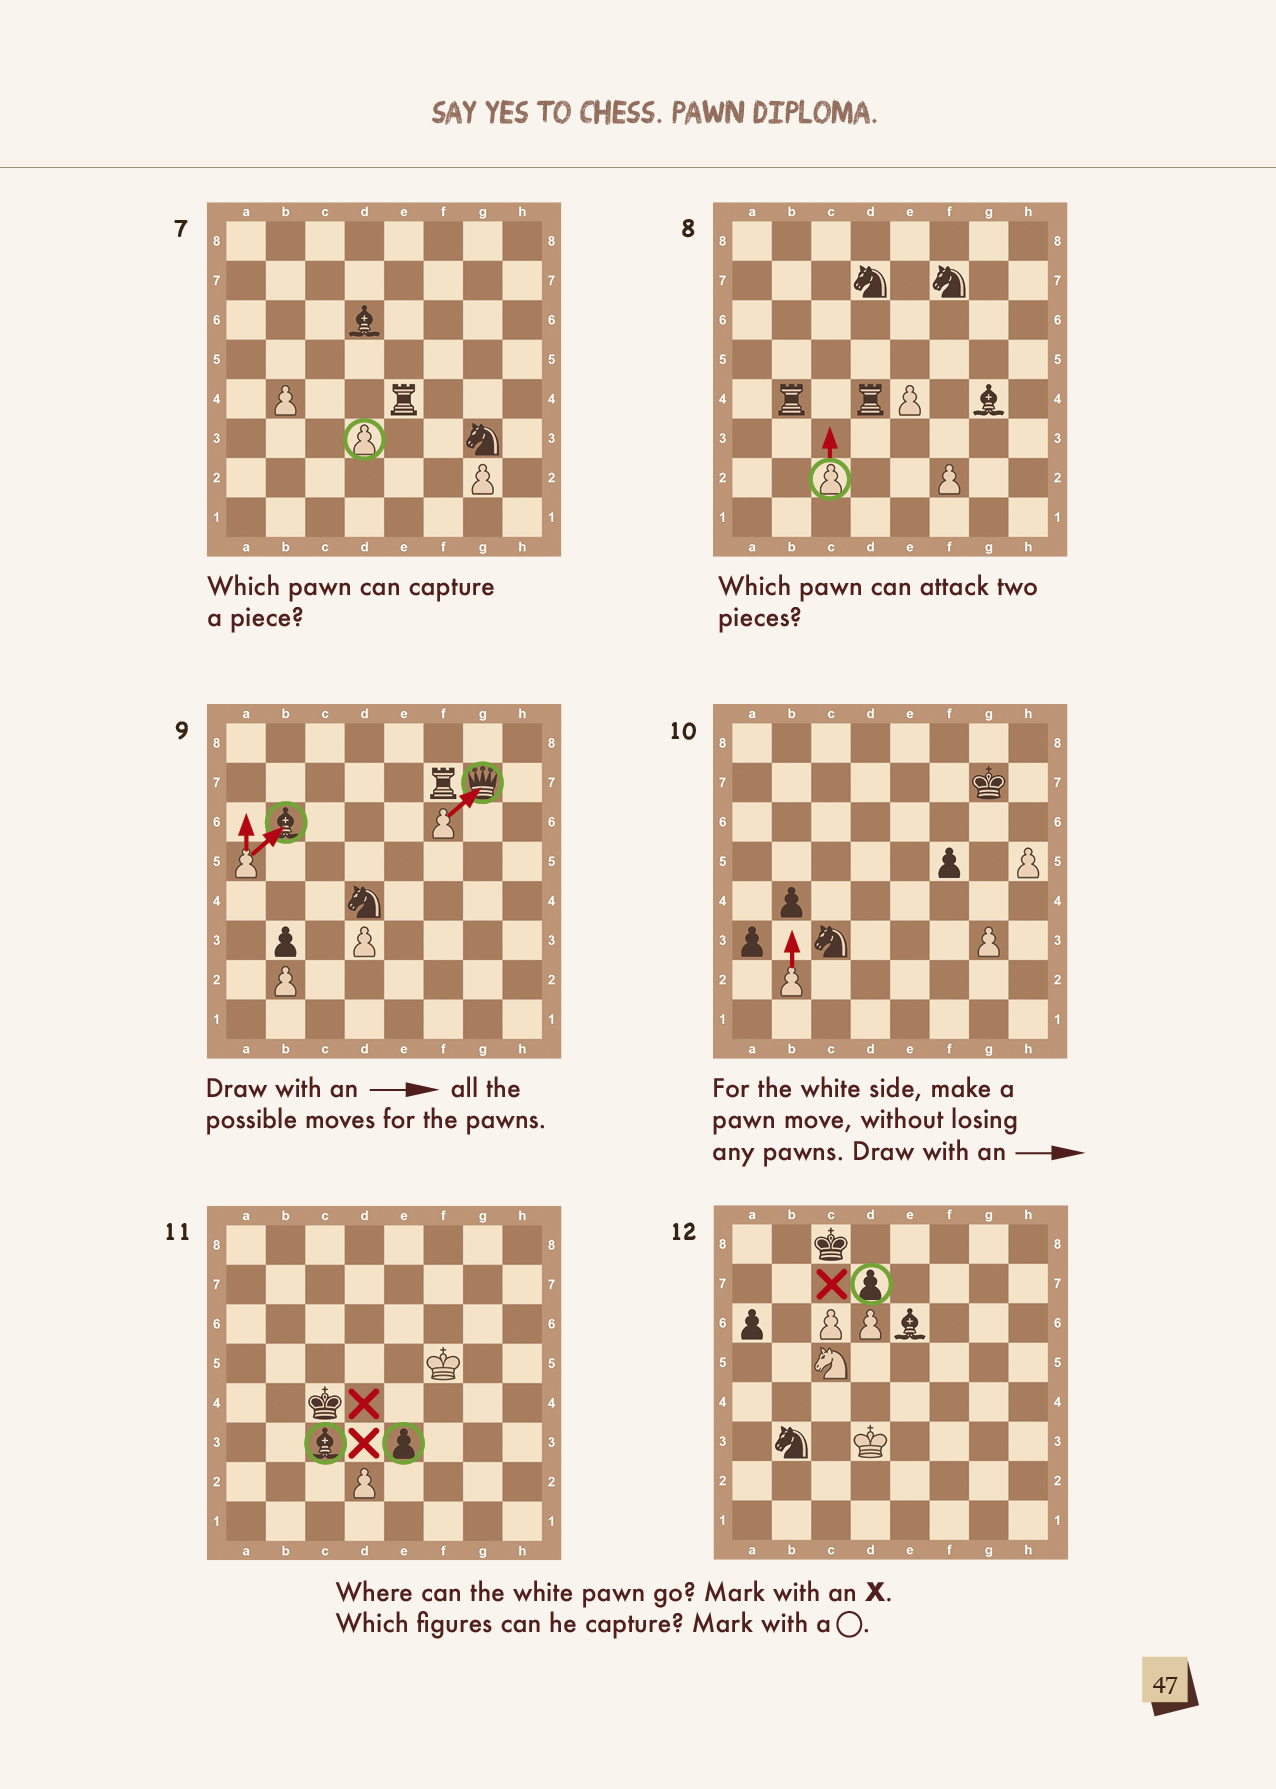 sayyes2chess_solutions_page_47.jpg